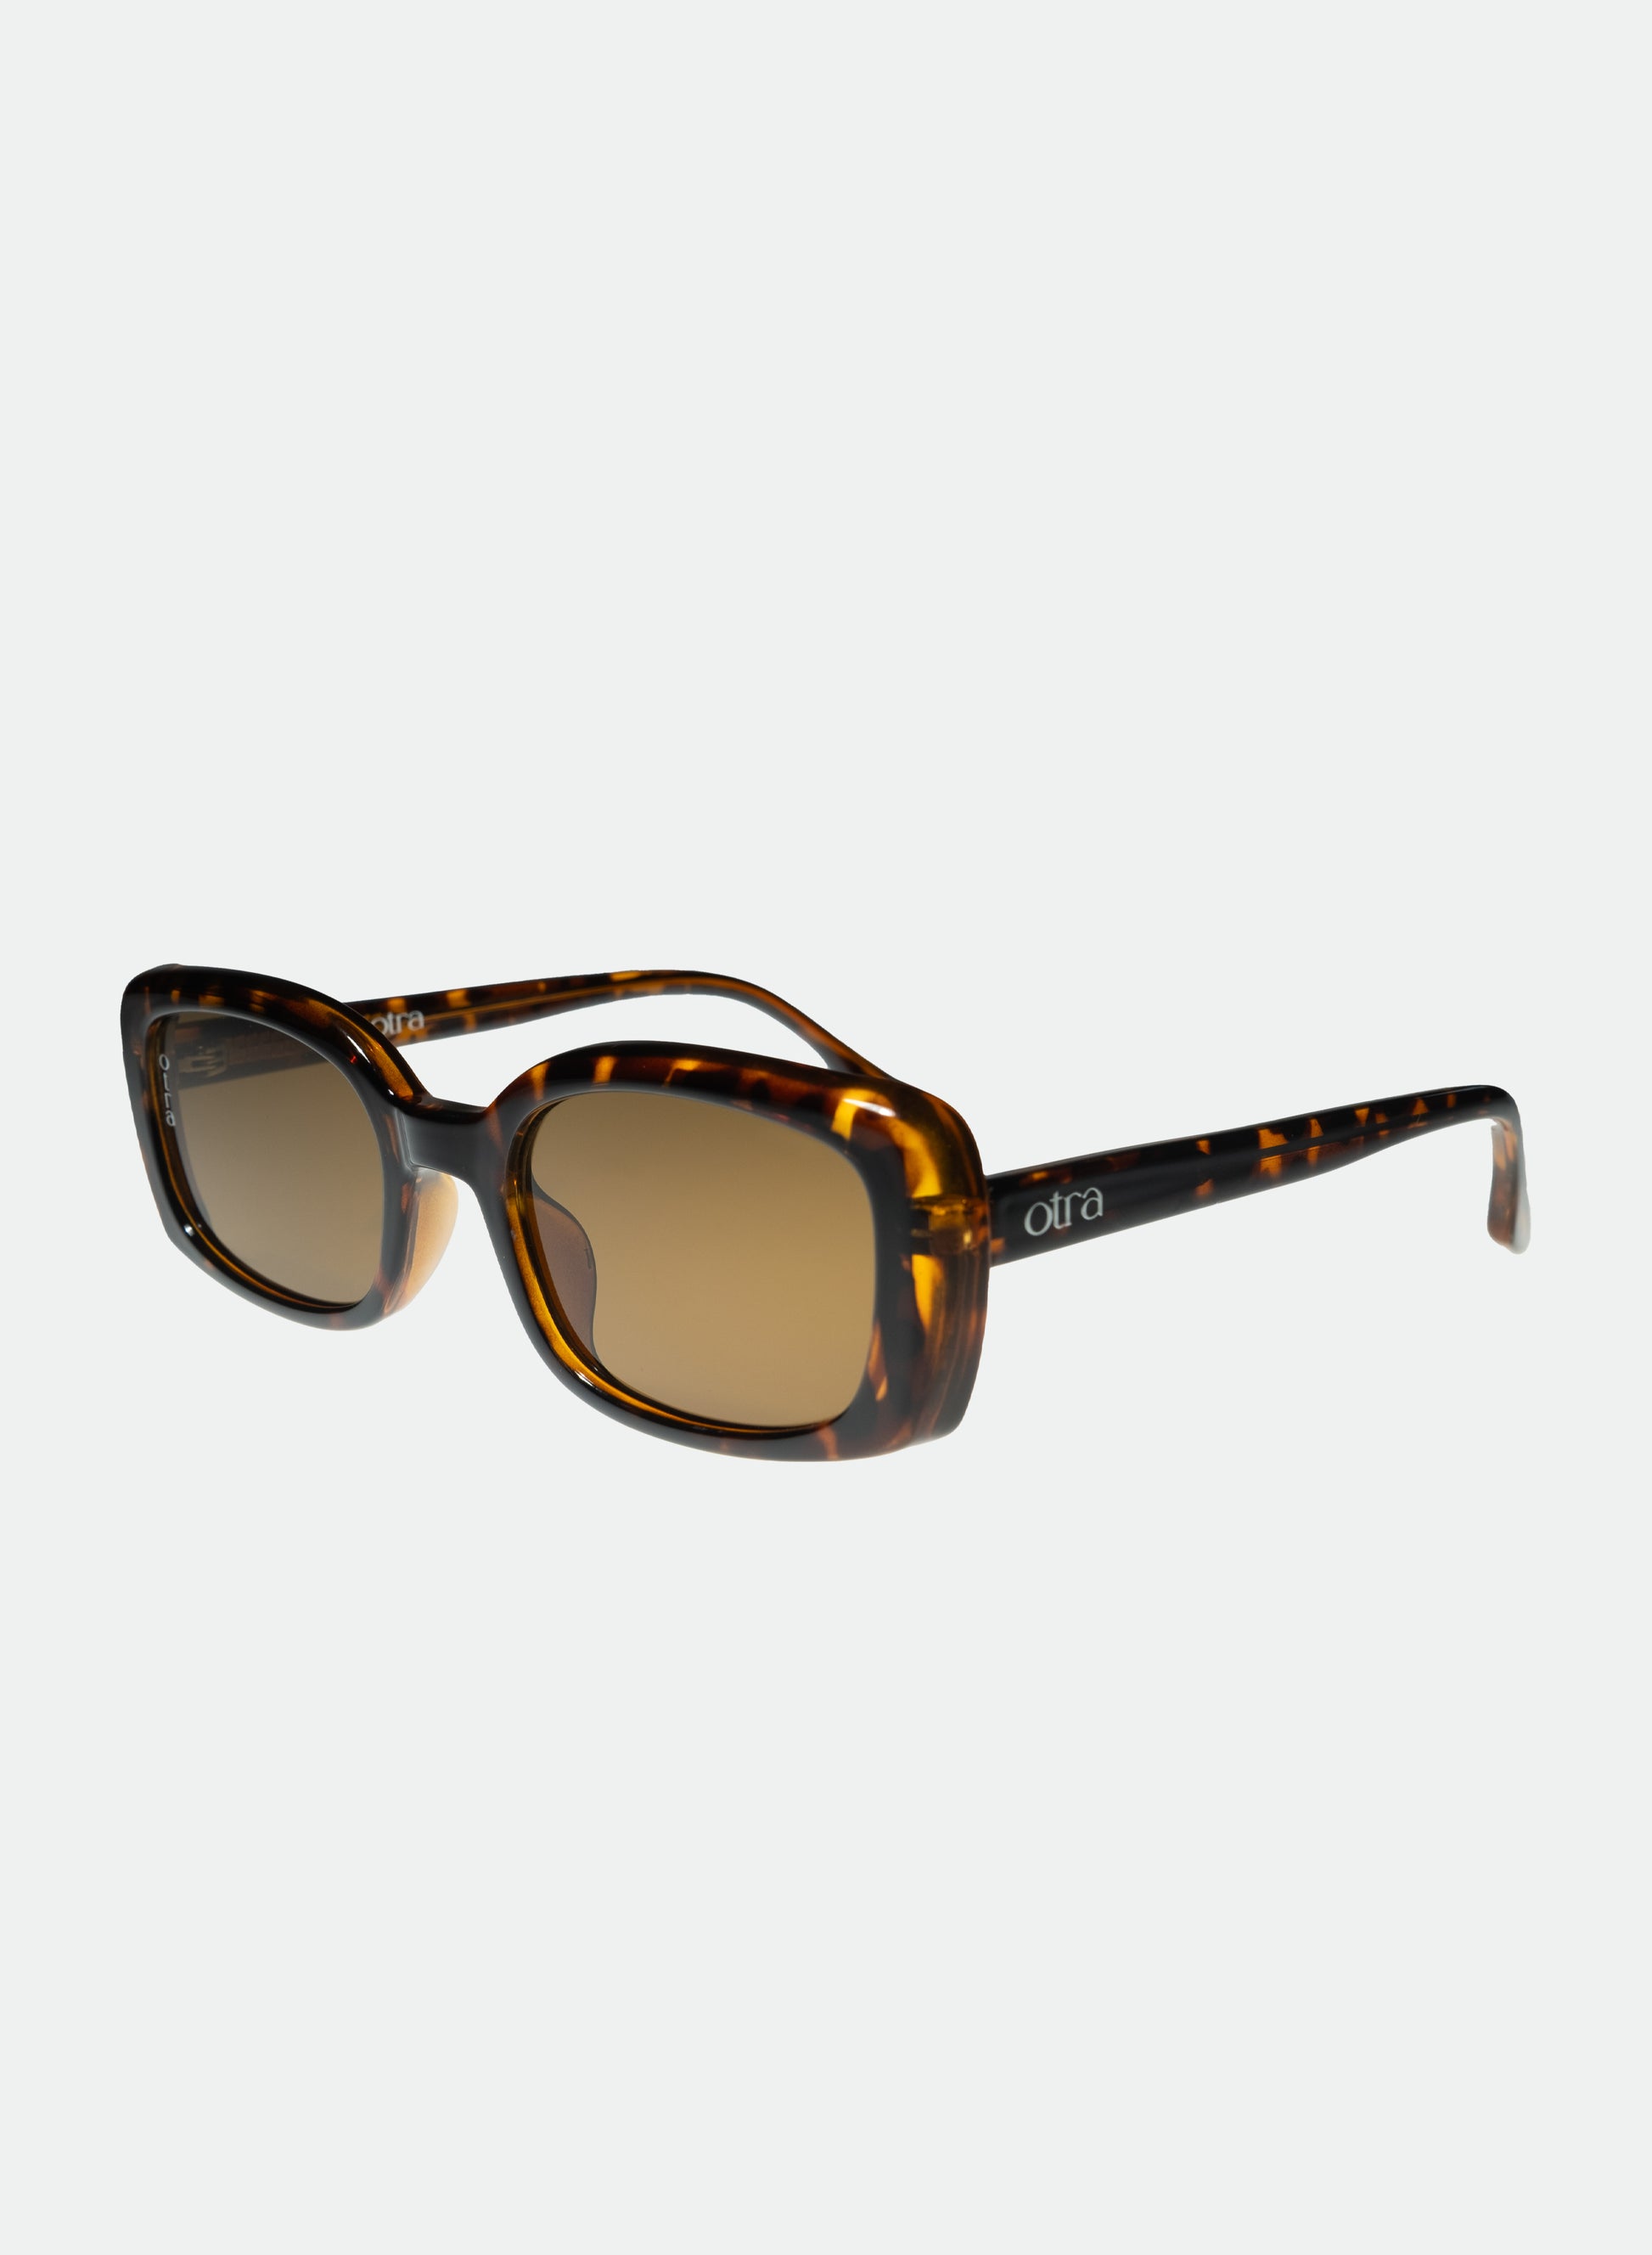 Side view of Daisy small rectangle sunglasses in brown tortoiseshell